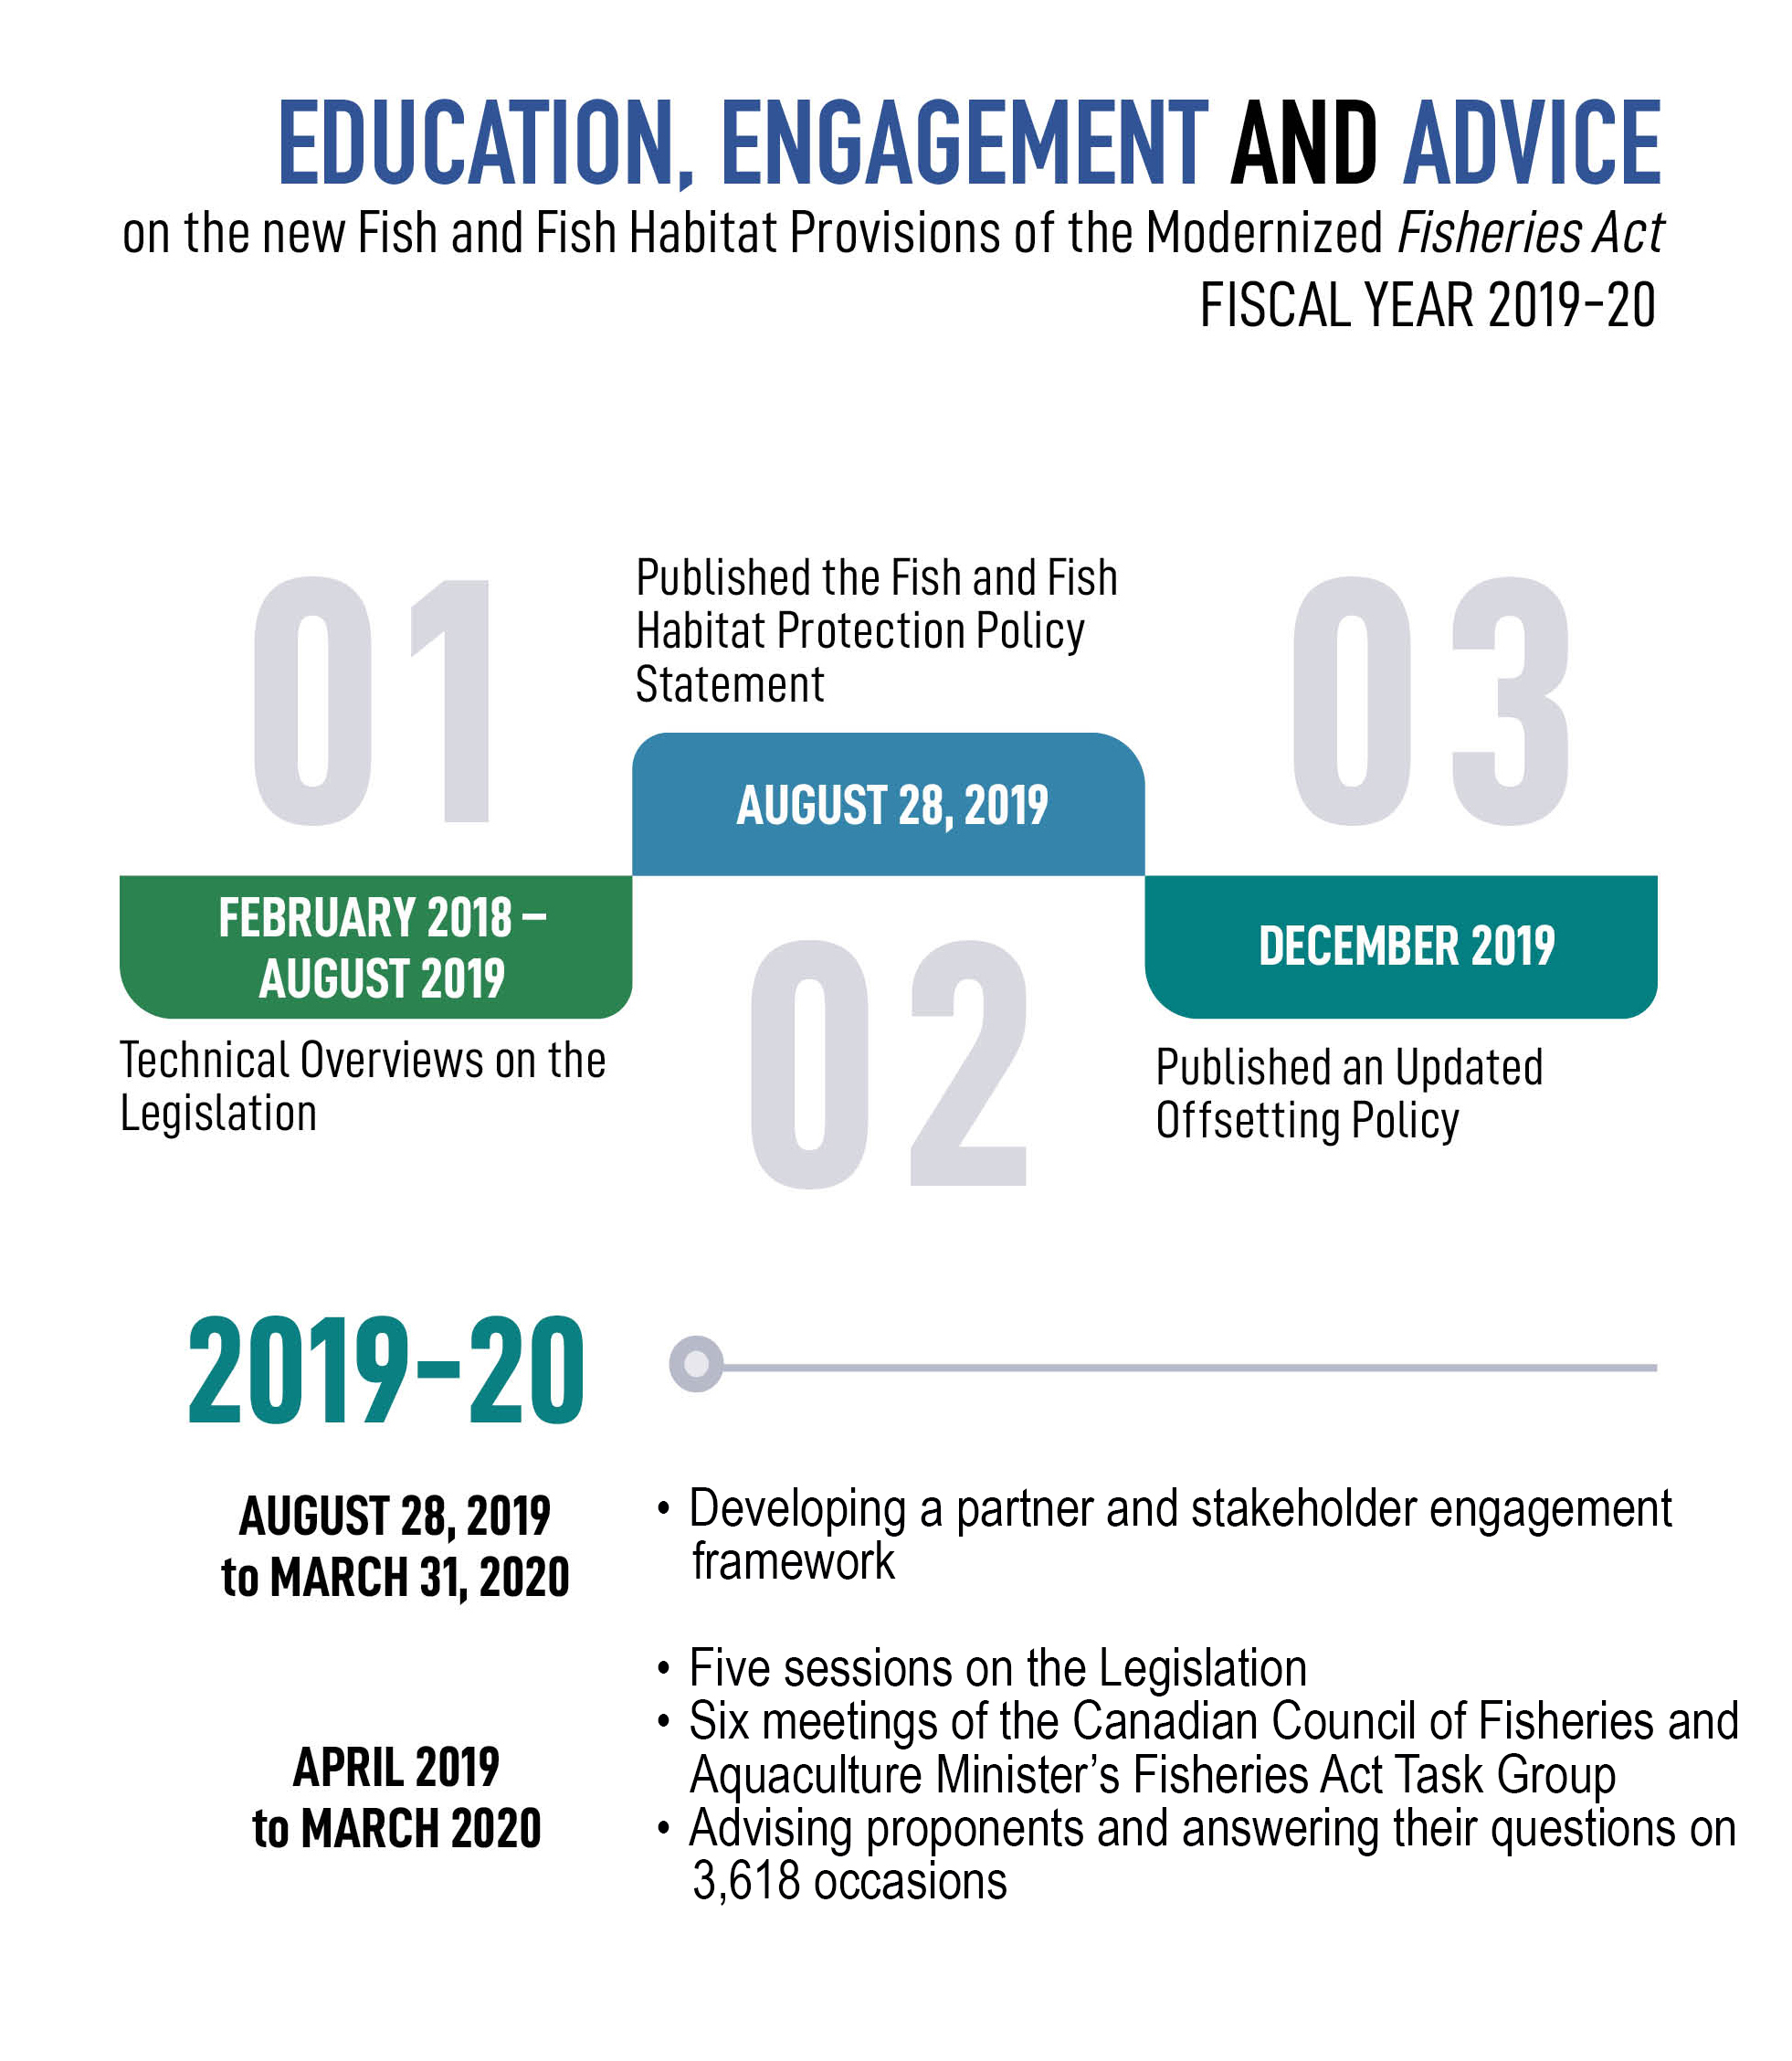 Infographic showing the timeline for education, engagement and advice that we delivered on the new fish and fish habitat provisions of the modernized Fisheries Act, as described in section 2.1.